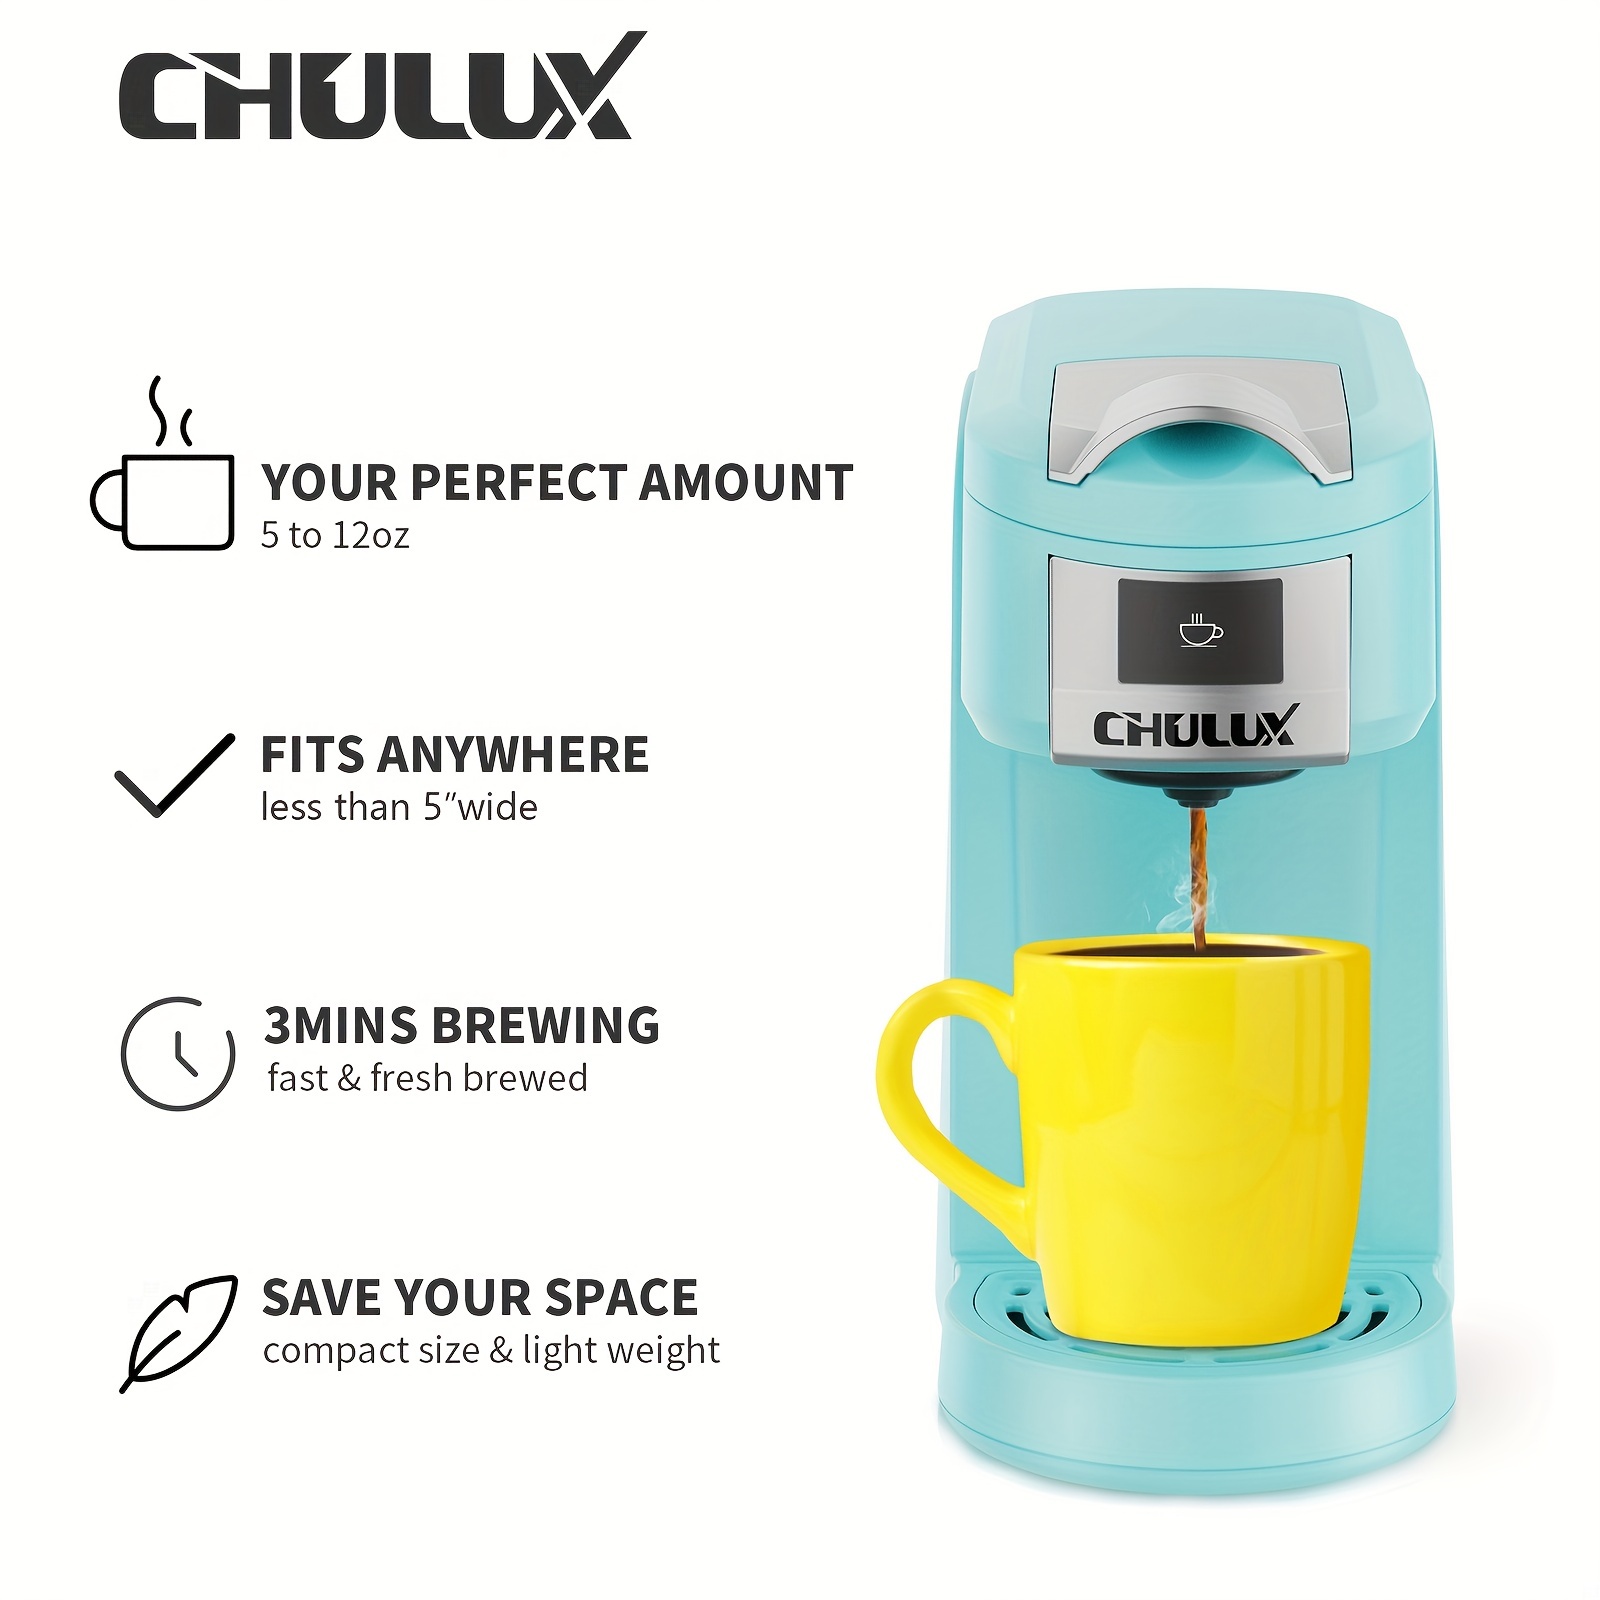 Chulux Single Cup Coffee Maker Machine,12 Ounce Pod Coffee Brewer,One Touch Function for Brewing Capsule or Ground Coffee,Cyan